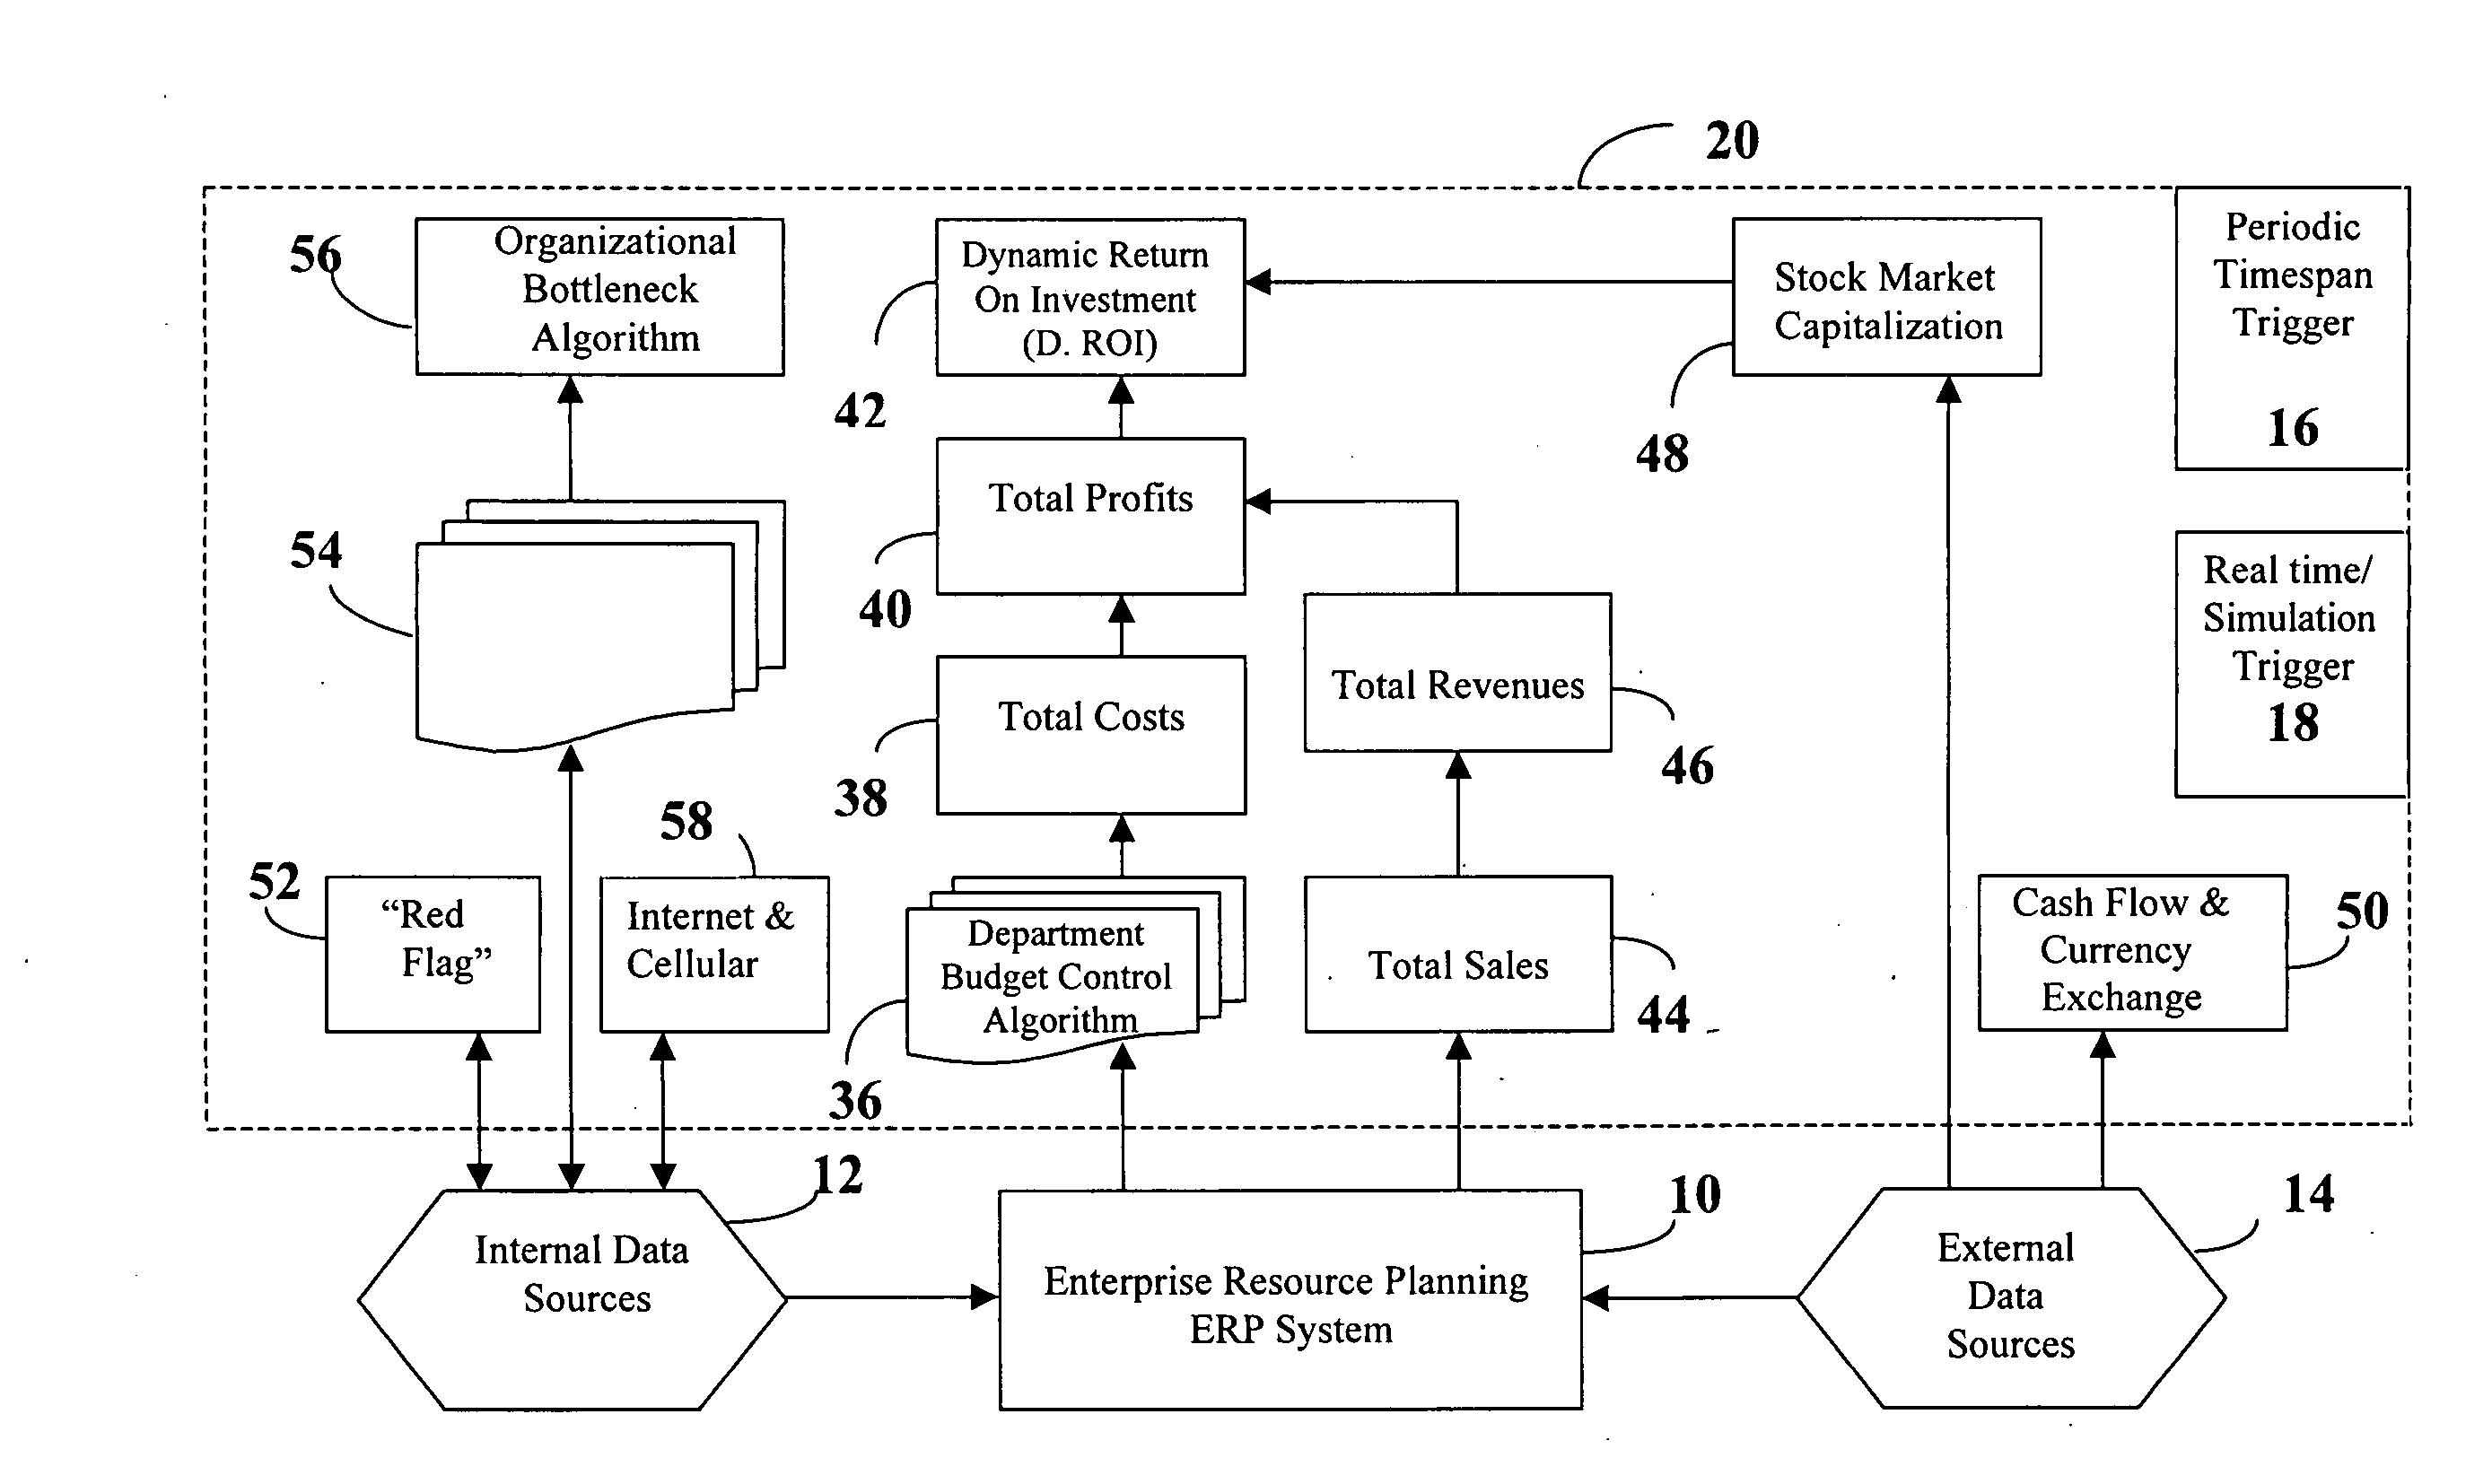 Method and System for Controlling and Managing an Organization